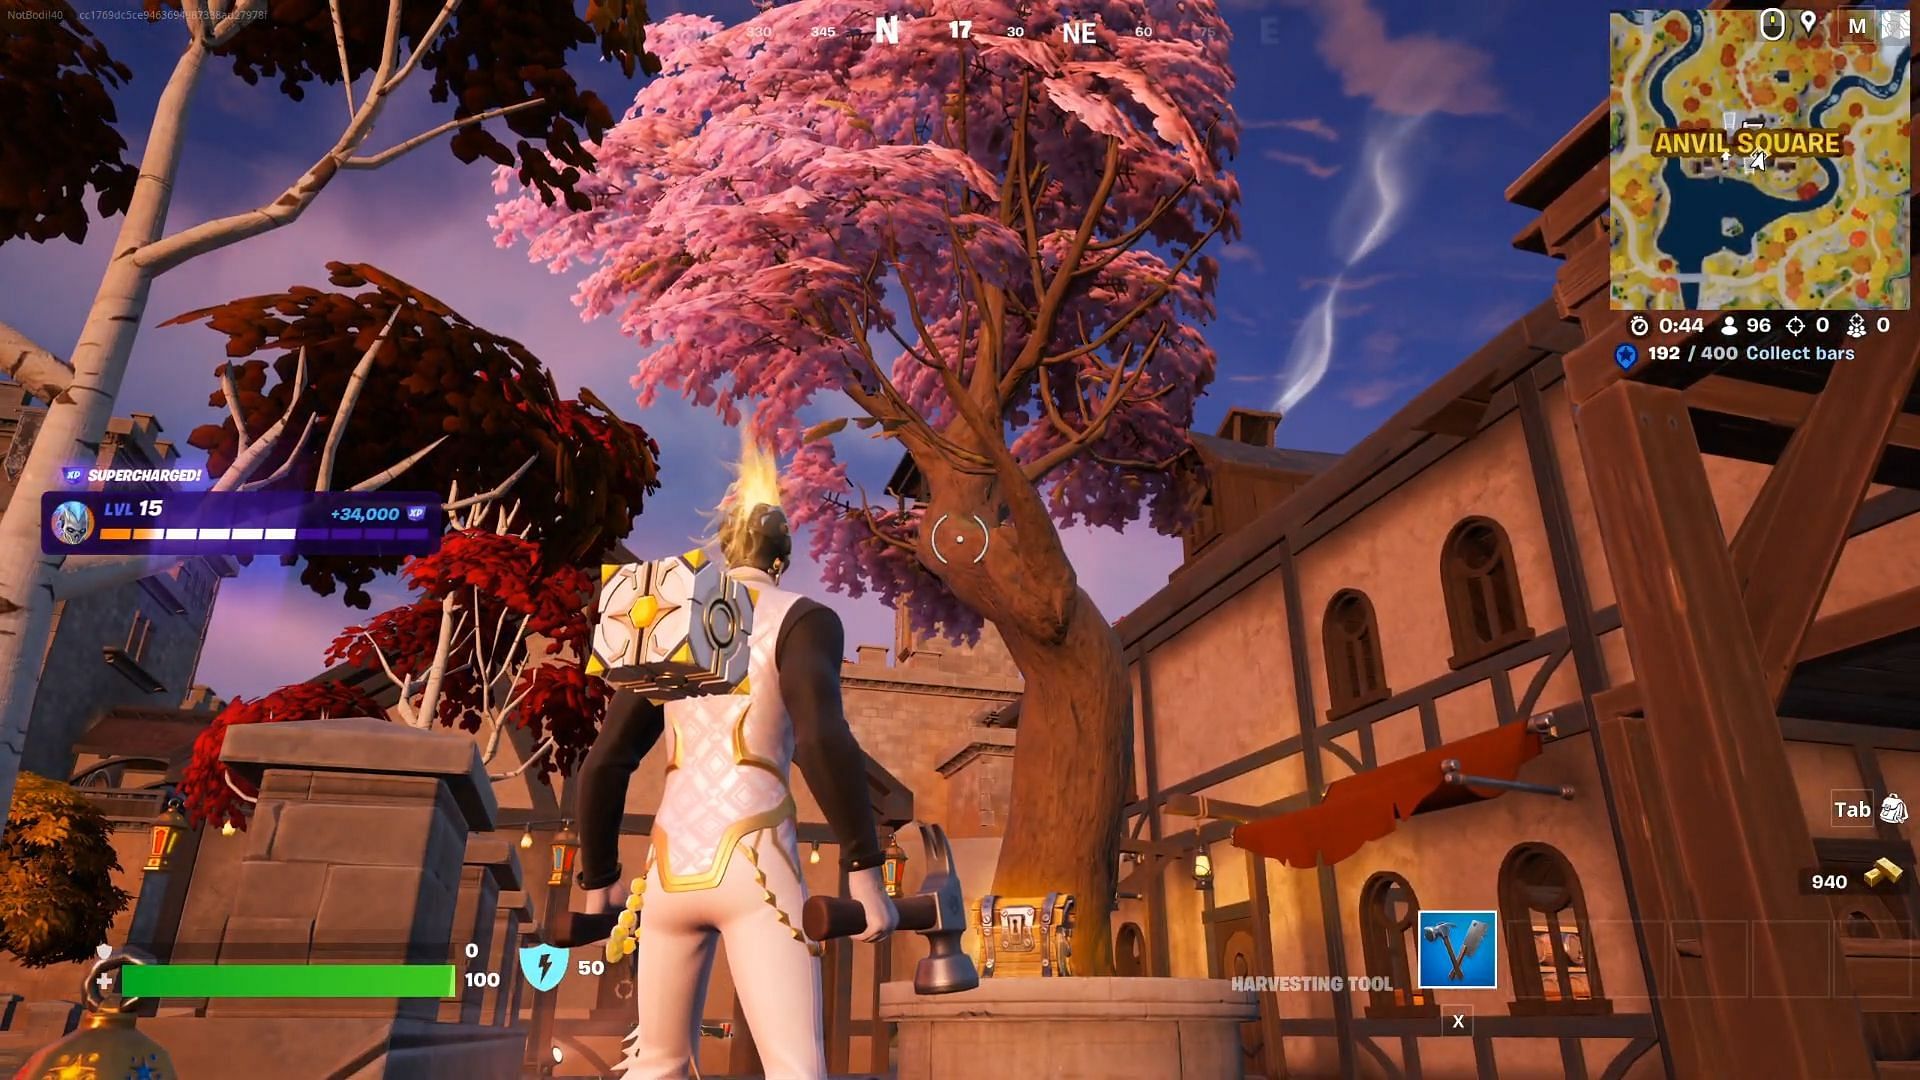 To complete the quest, you need to visit three different tree displays (Image via Epic Games)